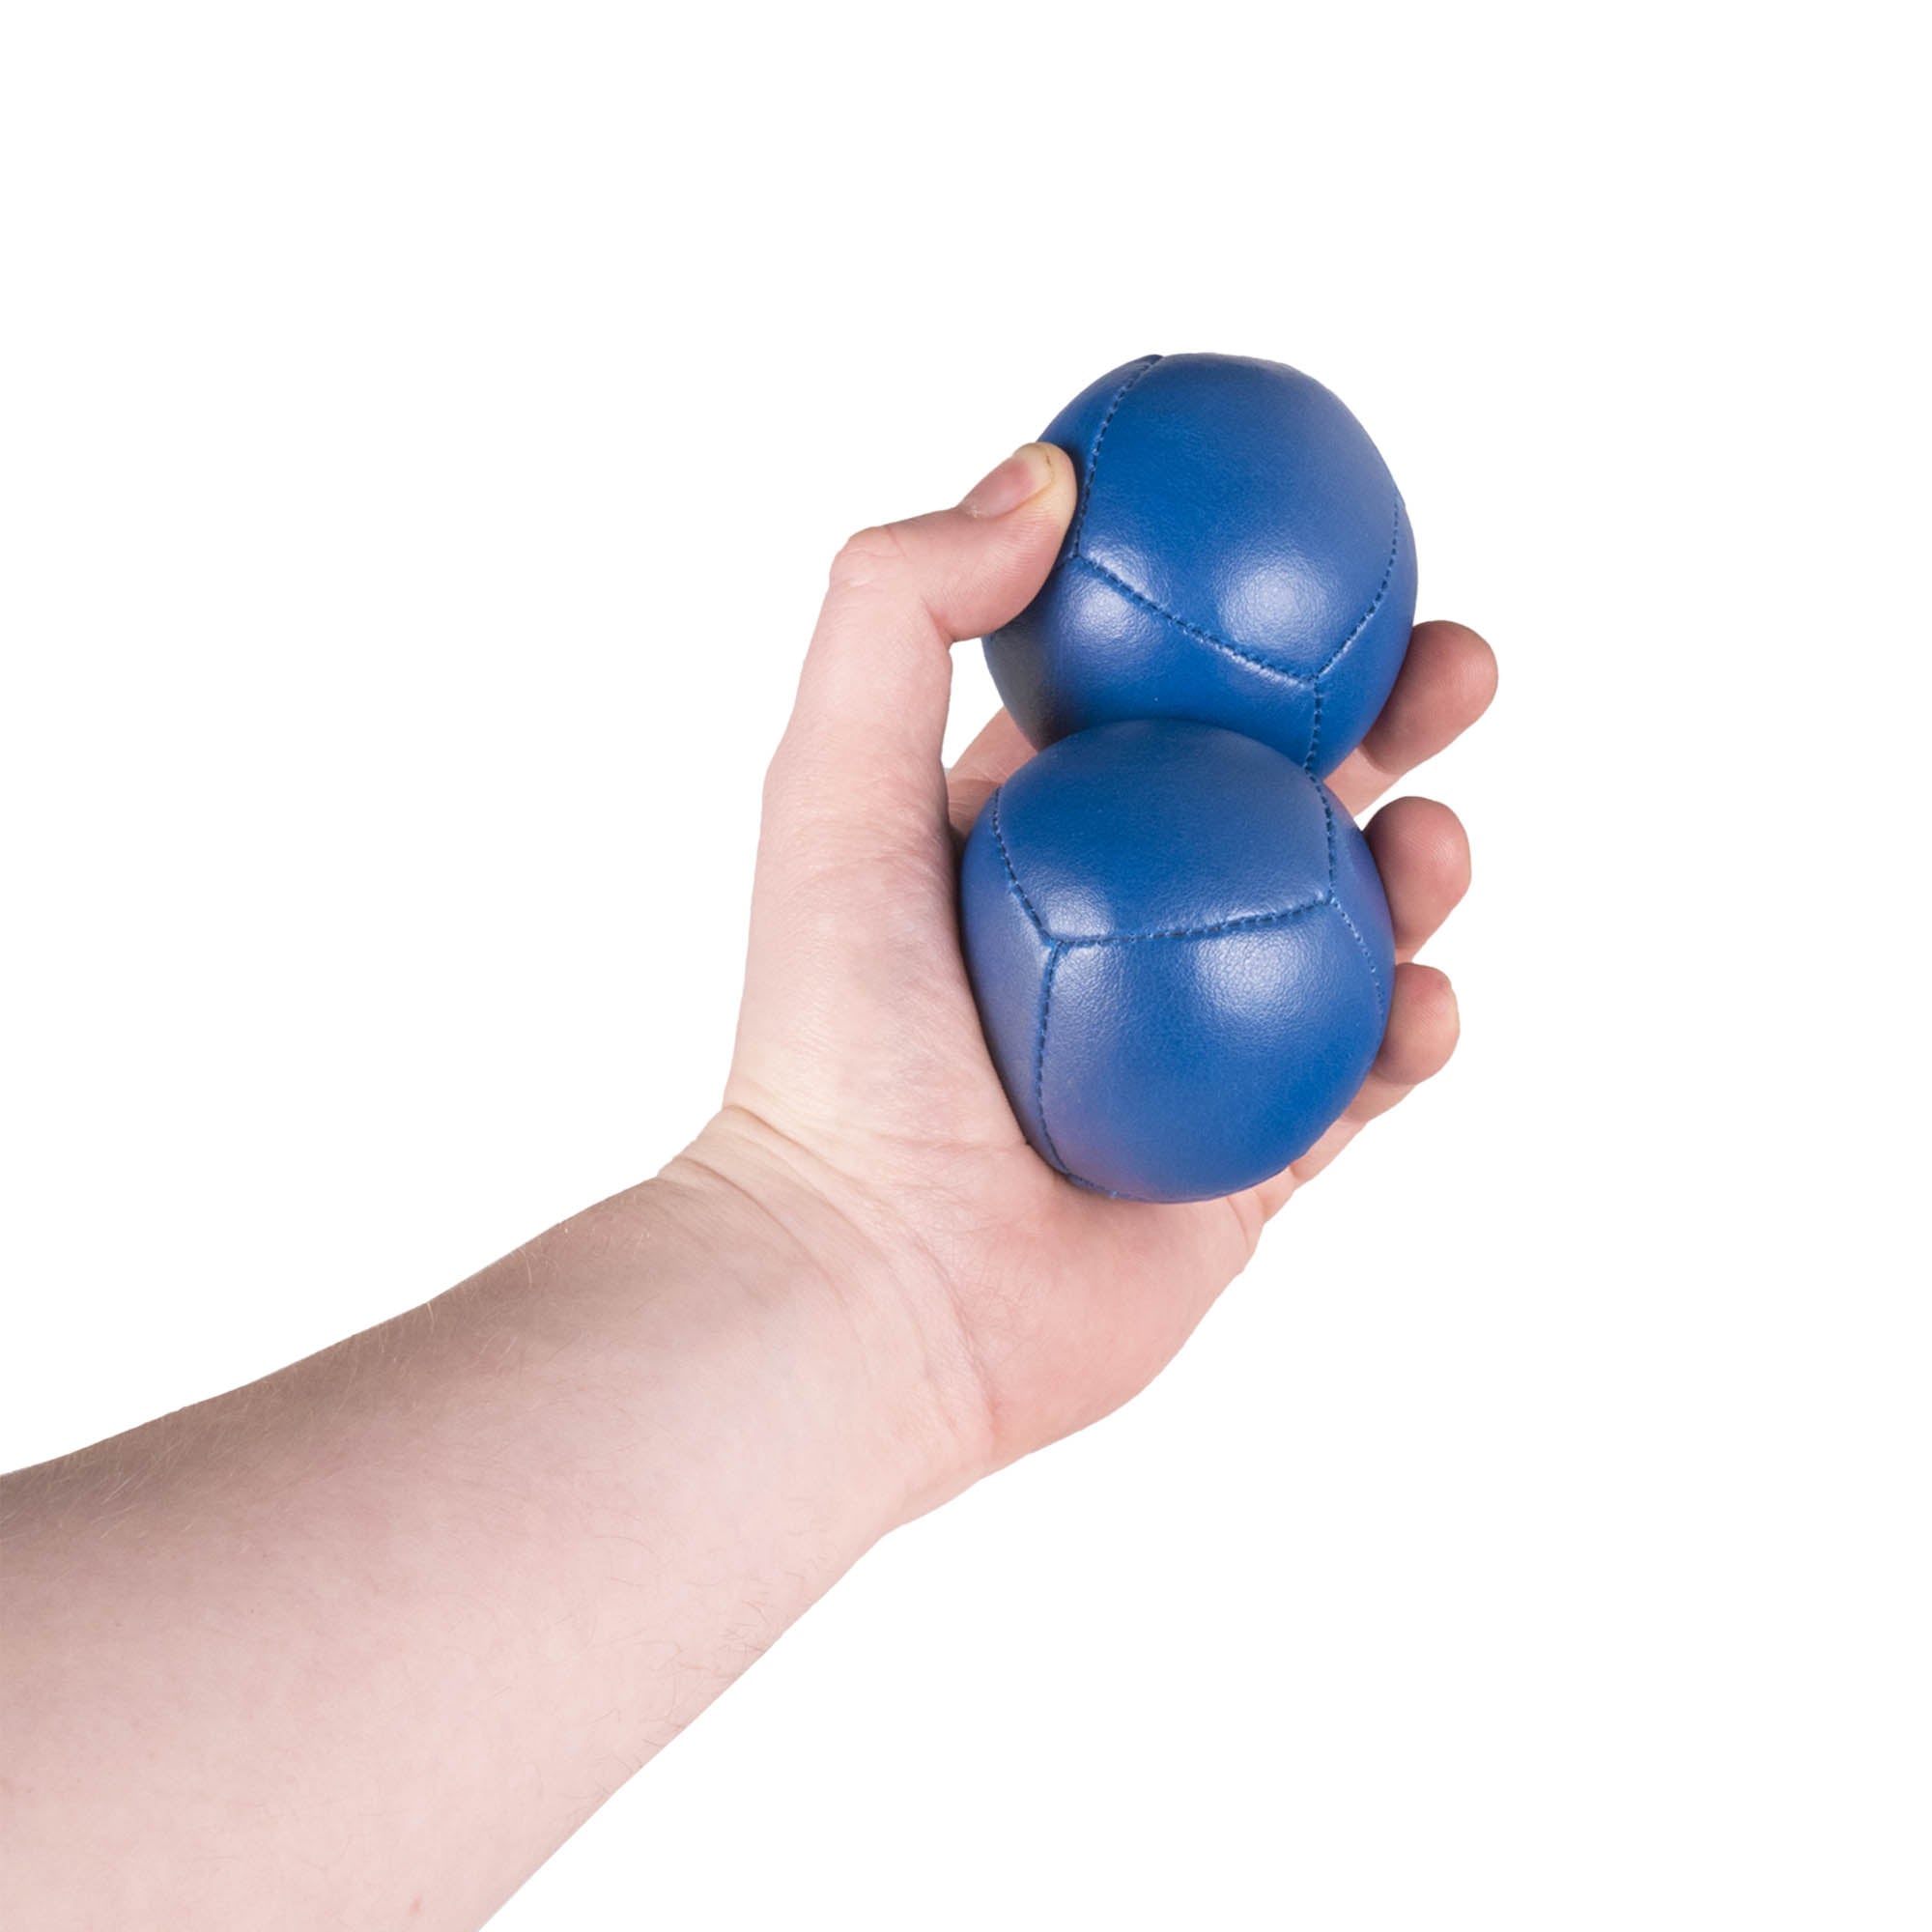 Firetoys two blue 110g thud juggling balls in hand